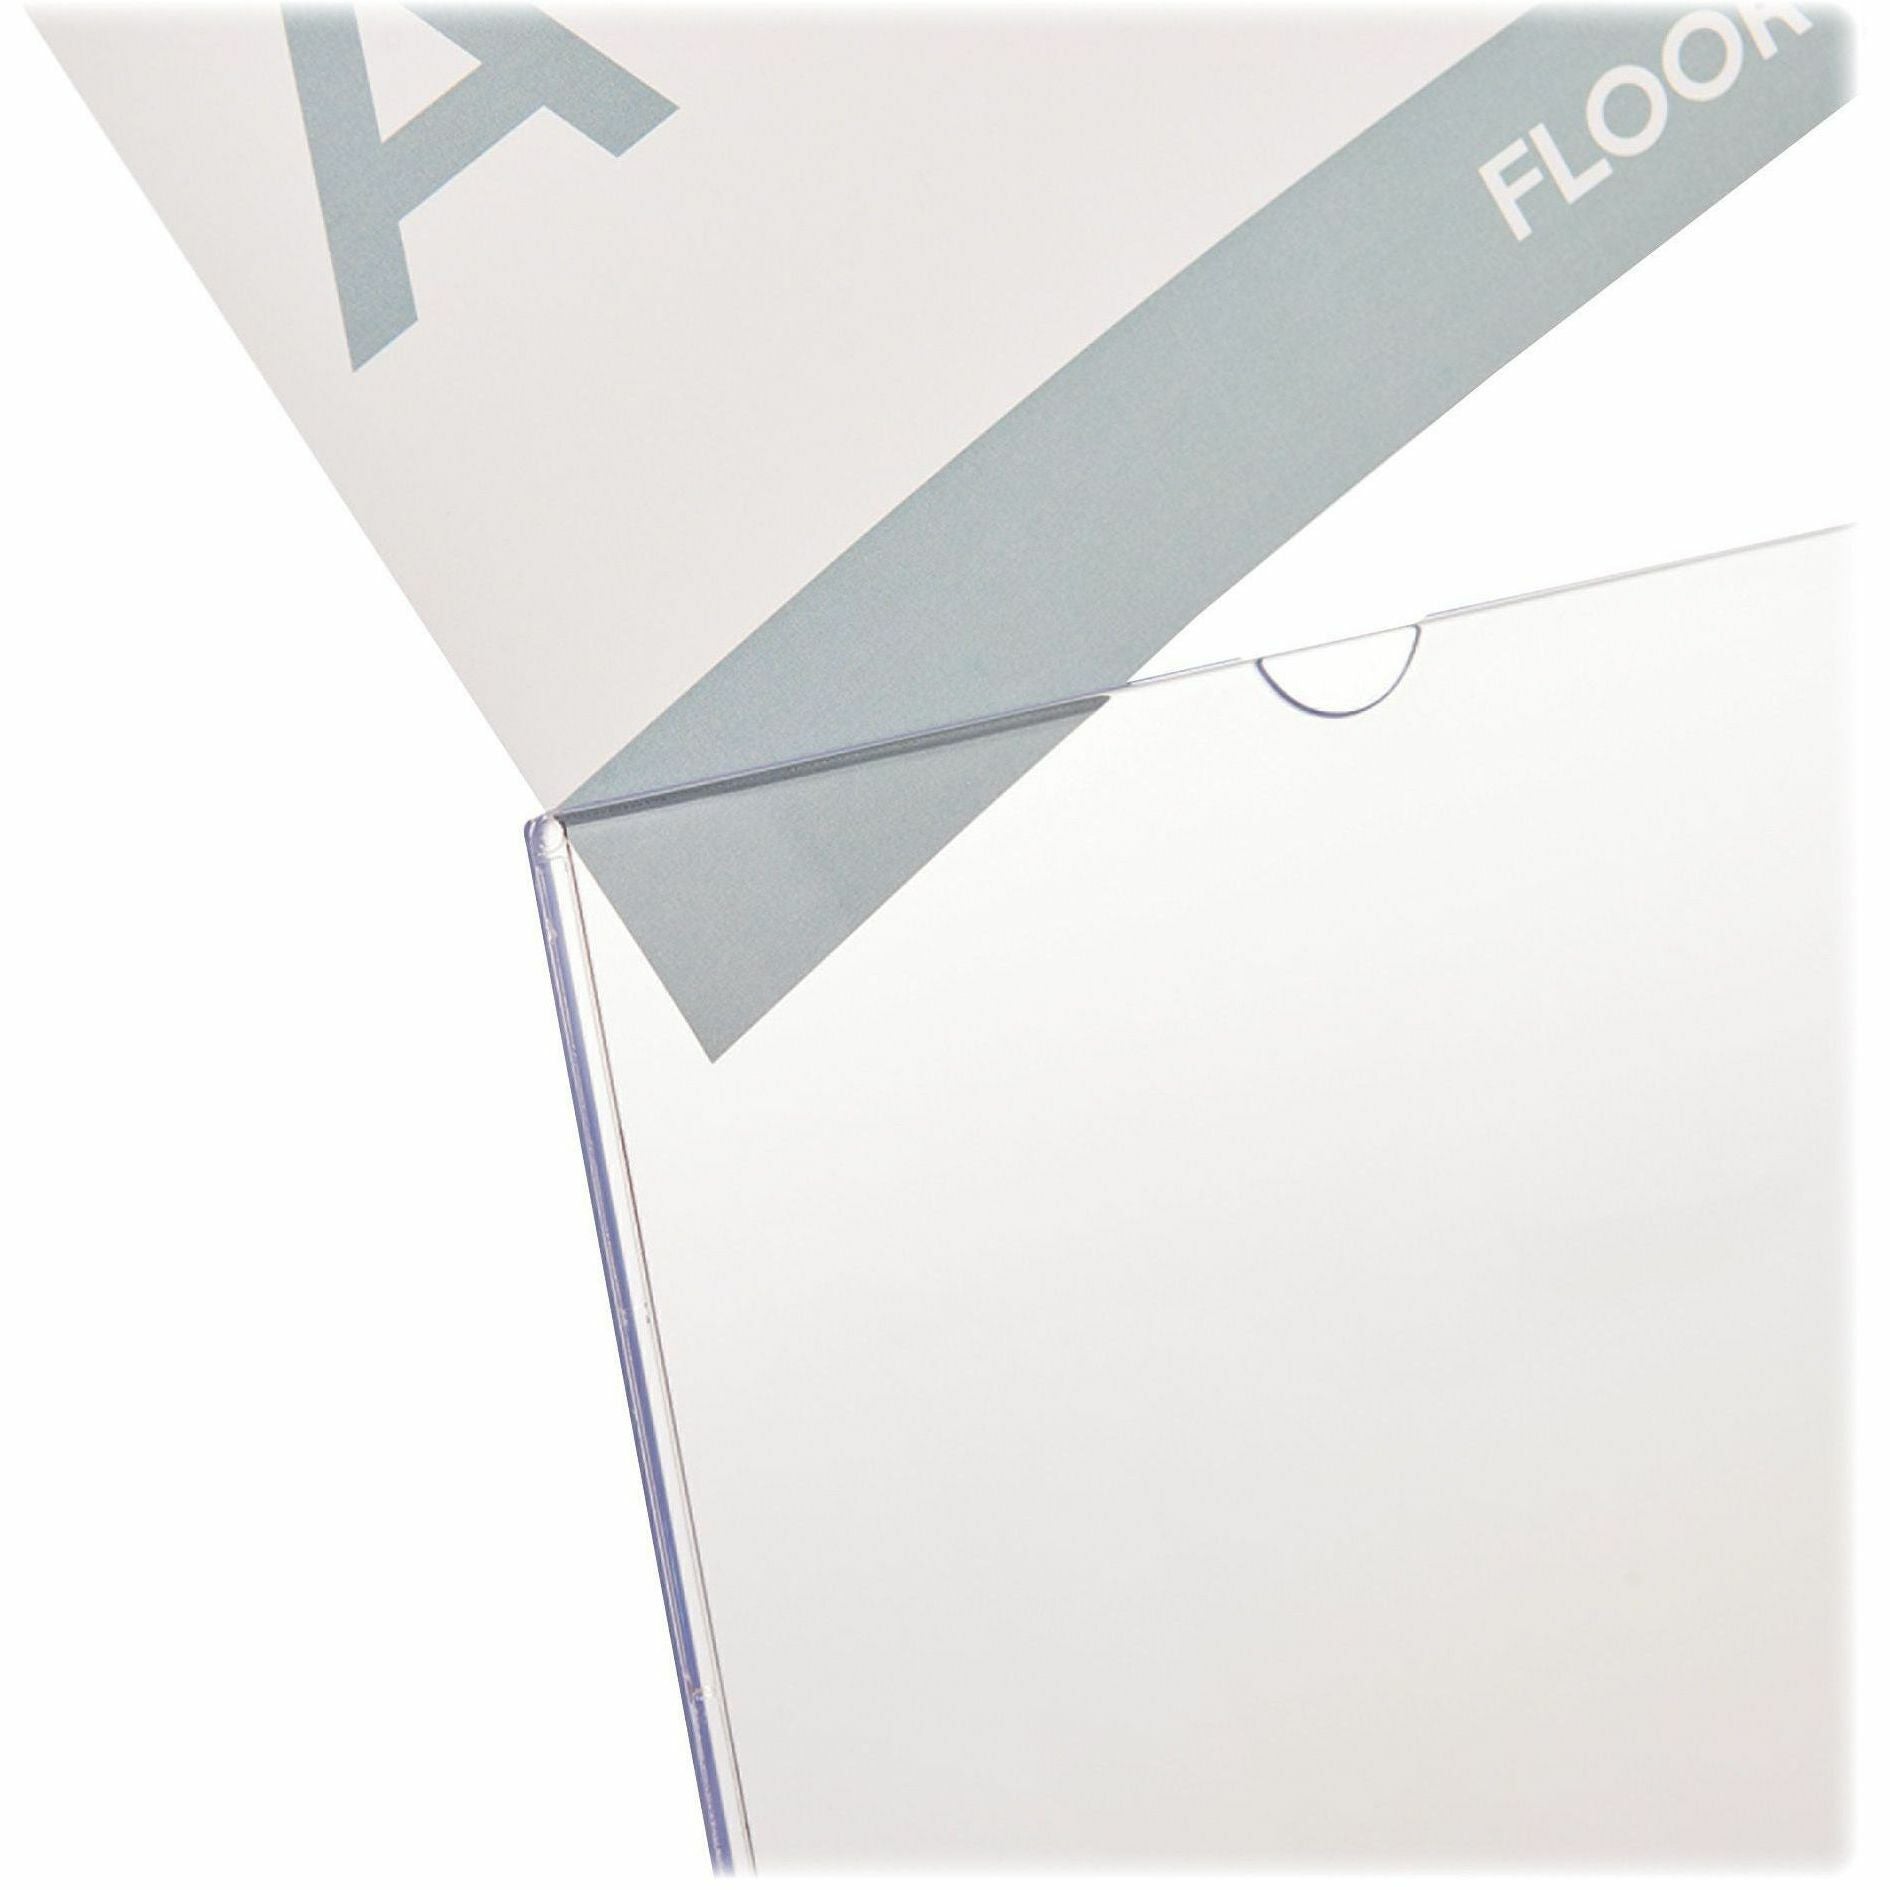 deflecto-superior-image-slanted-sign-holders-12-carton-85-width-x-11-height-x-35-depth-l-shaped-shape-top-loading-durable-polystyrene-clear_def590101ct - 4